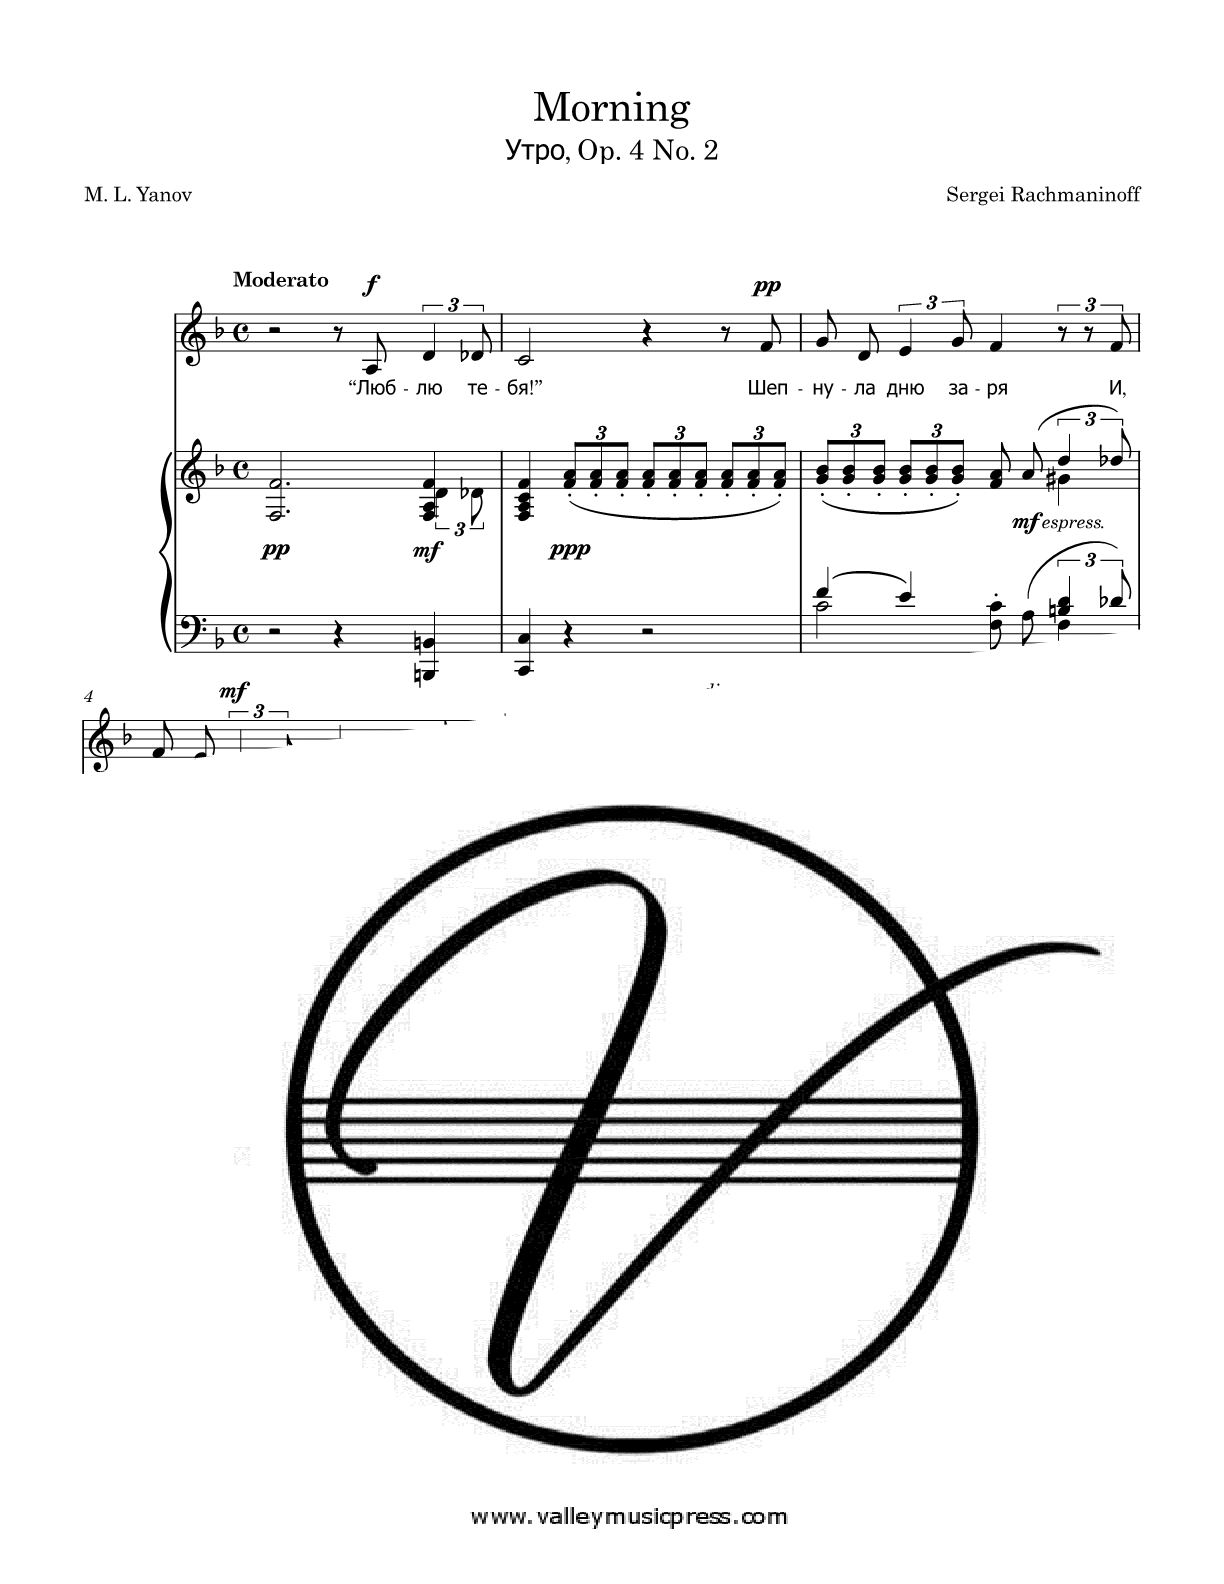 Rachmaninoff - Morning Op. 4 No. 2 (Voice) - Click Image to Close